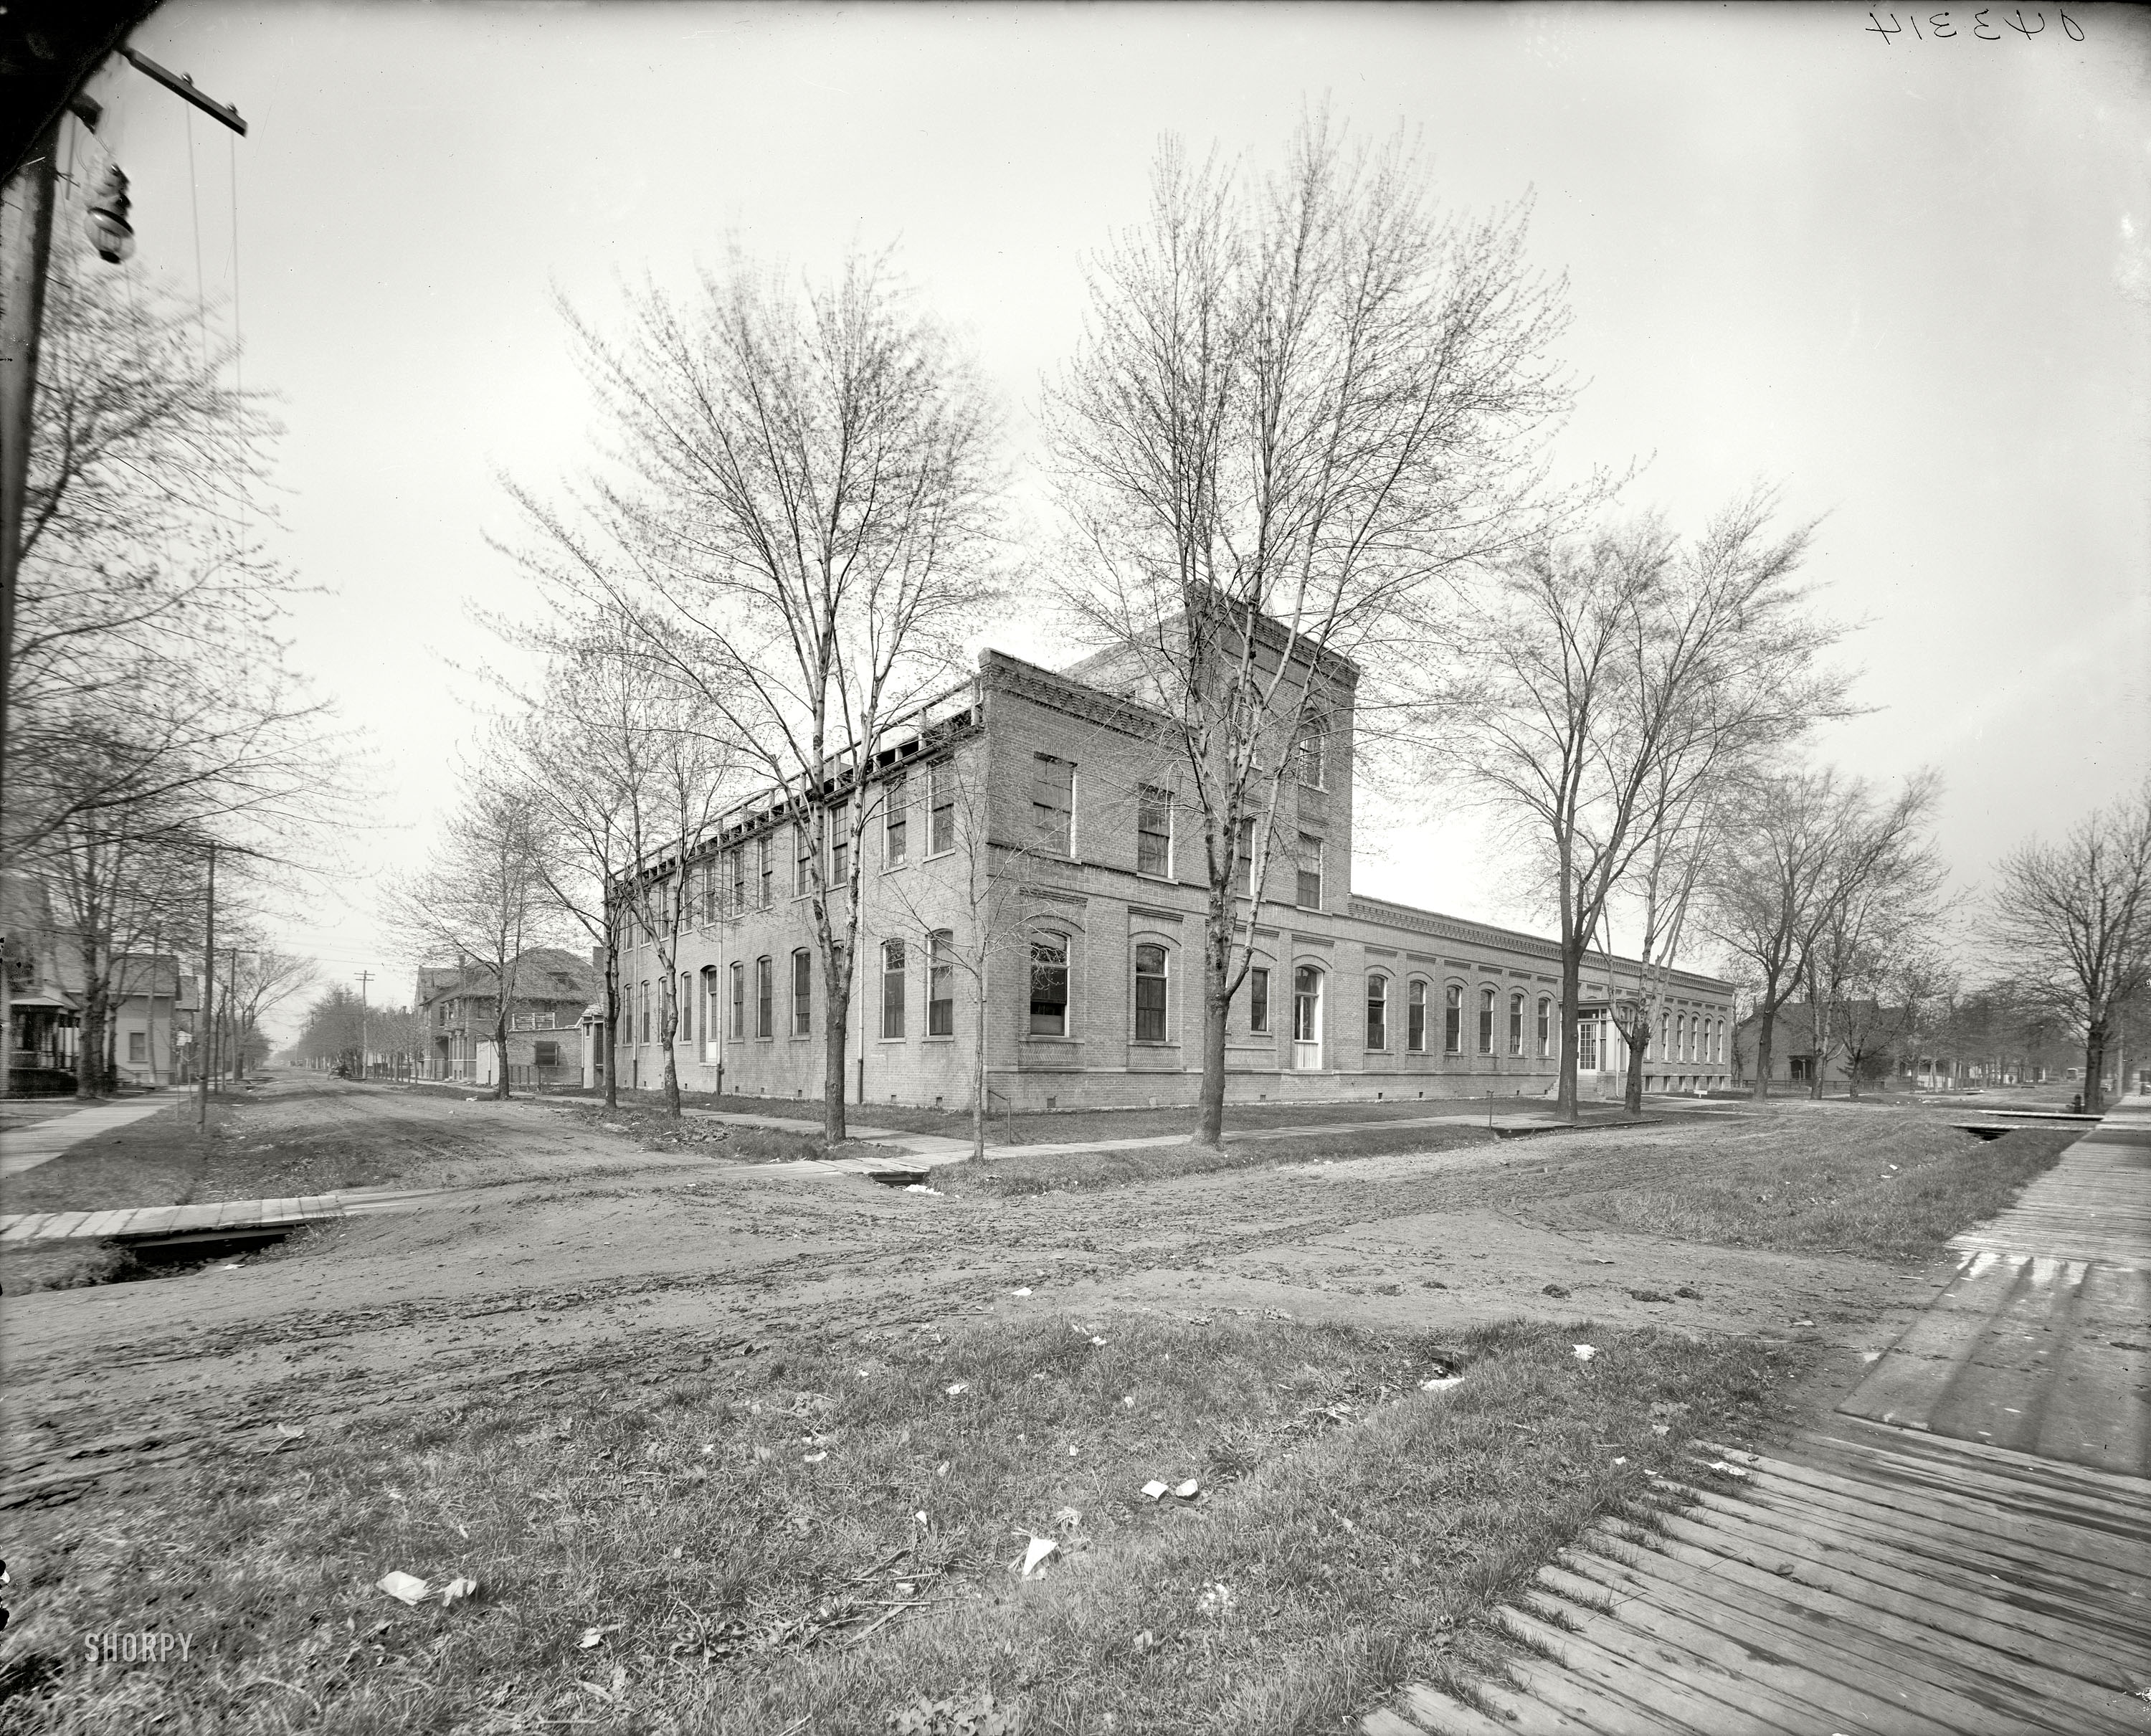 Detroit, Michigan, circa 1902. "Detroit Photographic Company, southeast view." Our second look at the home of the Photochrom-process postcard. View full size.